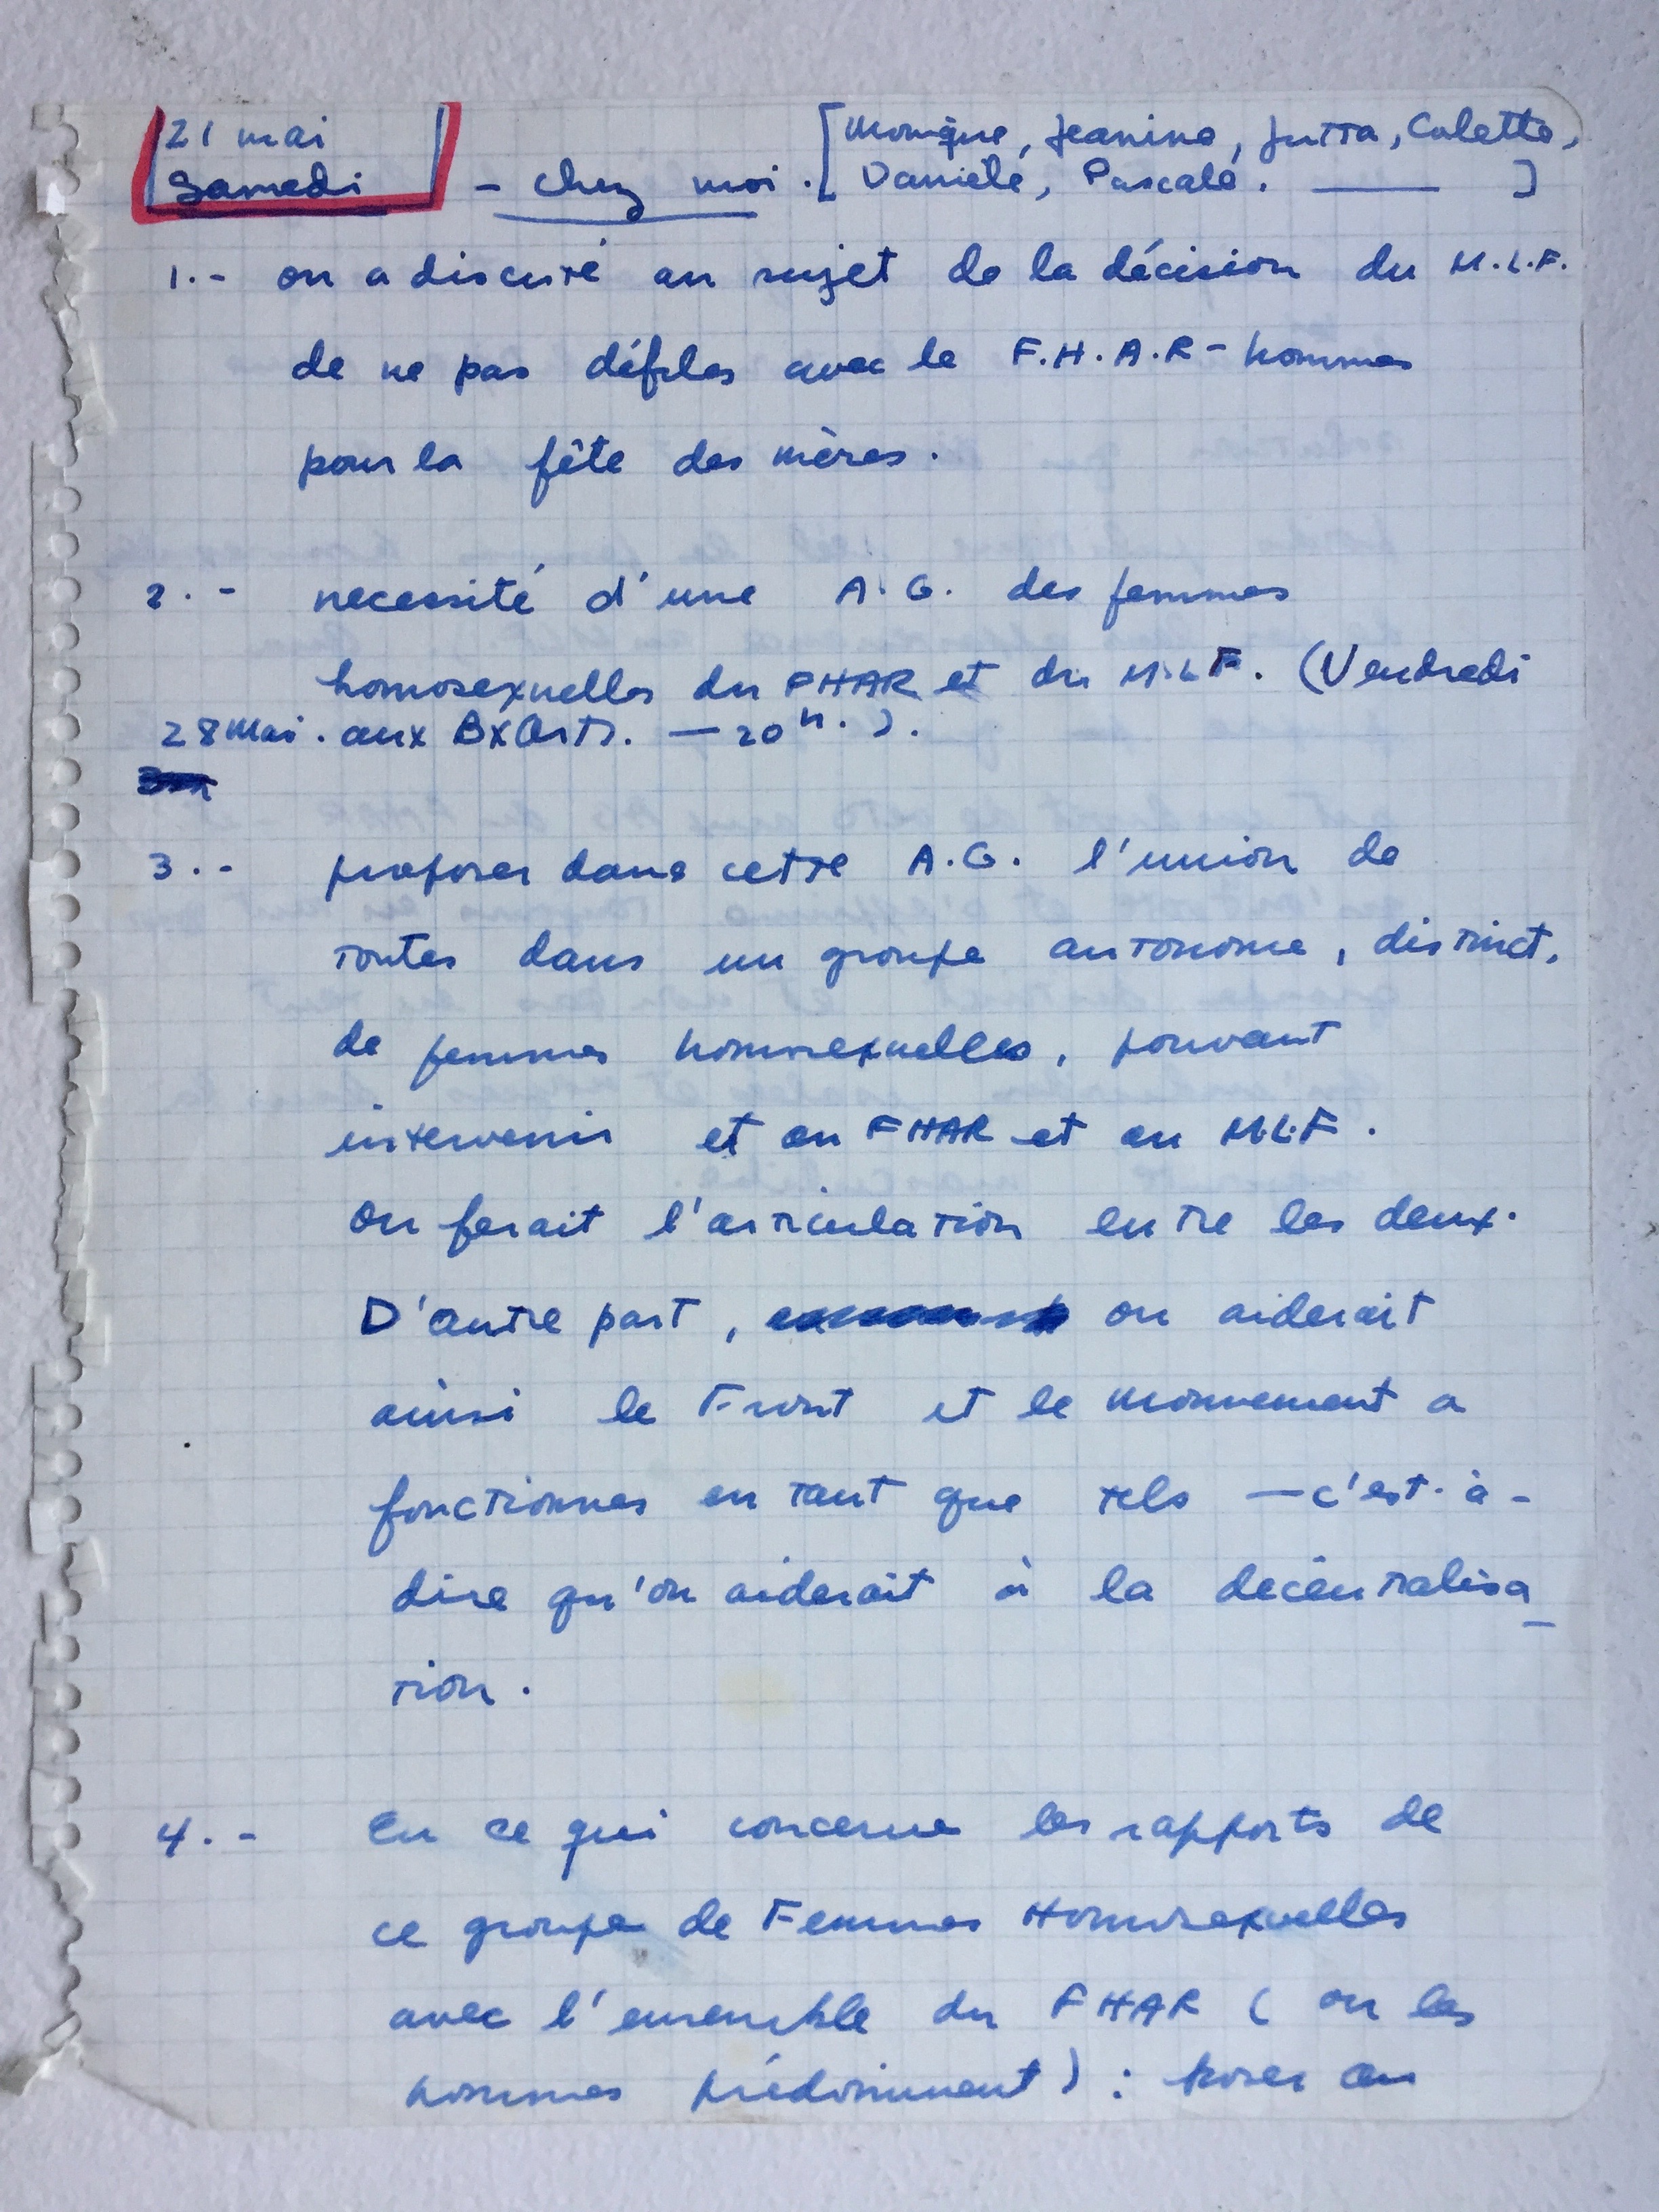 notes from activist meetings in Paris in the Seventies